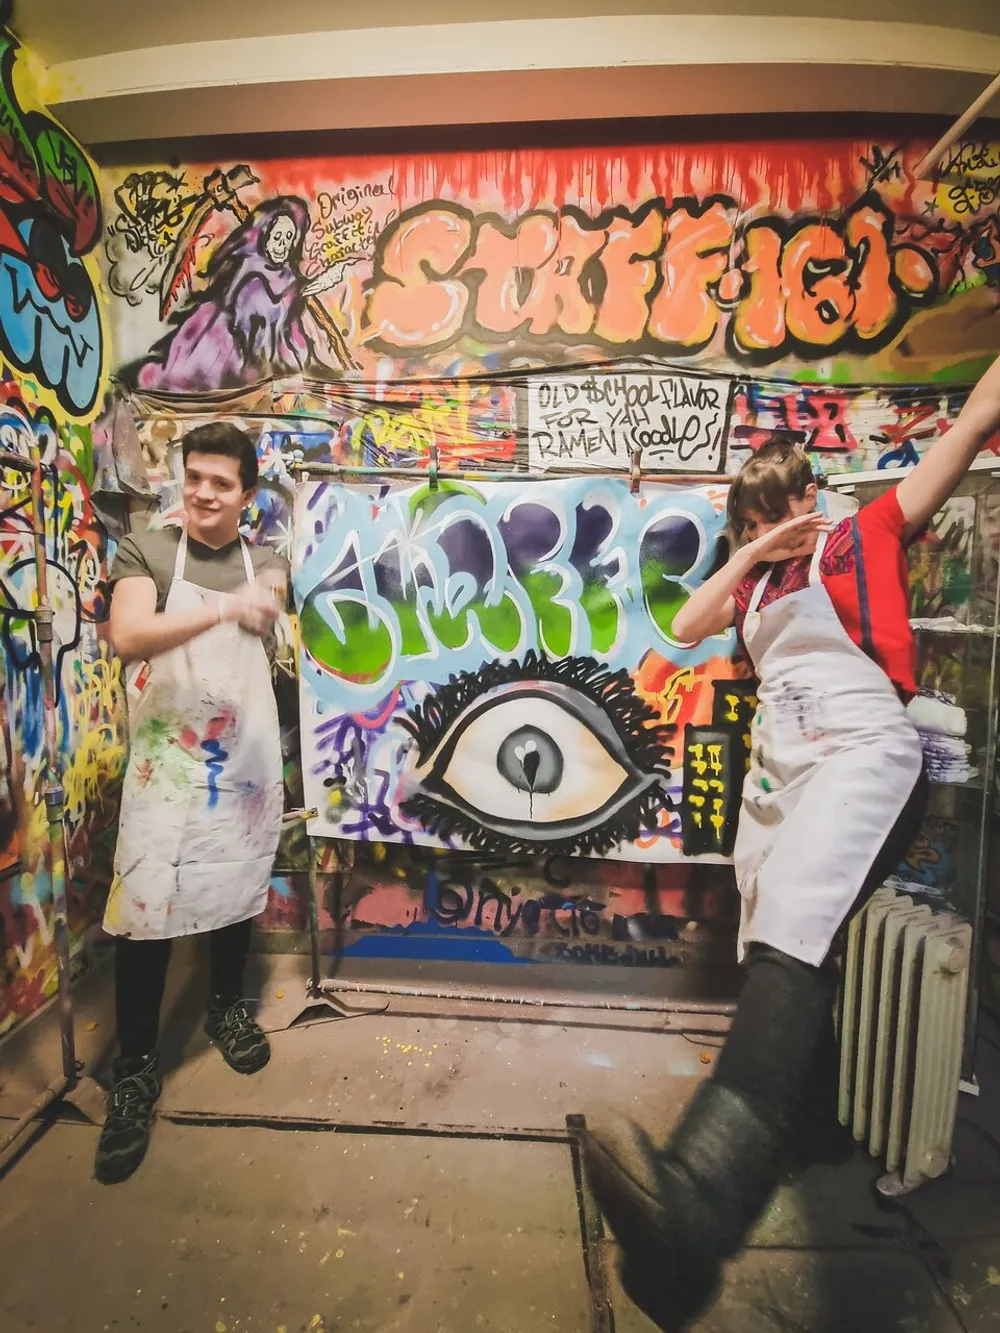 Two people in aprons are surrounded by vibrant graffiti art on walls with one person pointing at the camera and the other striking a playful pose